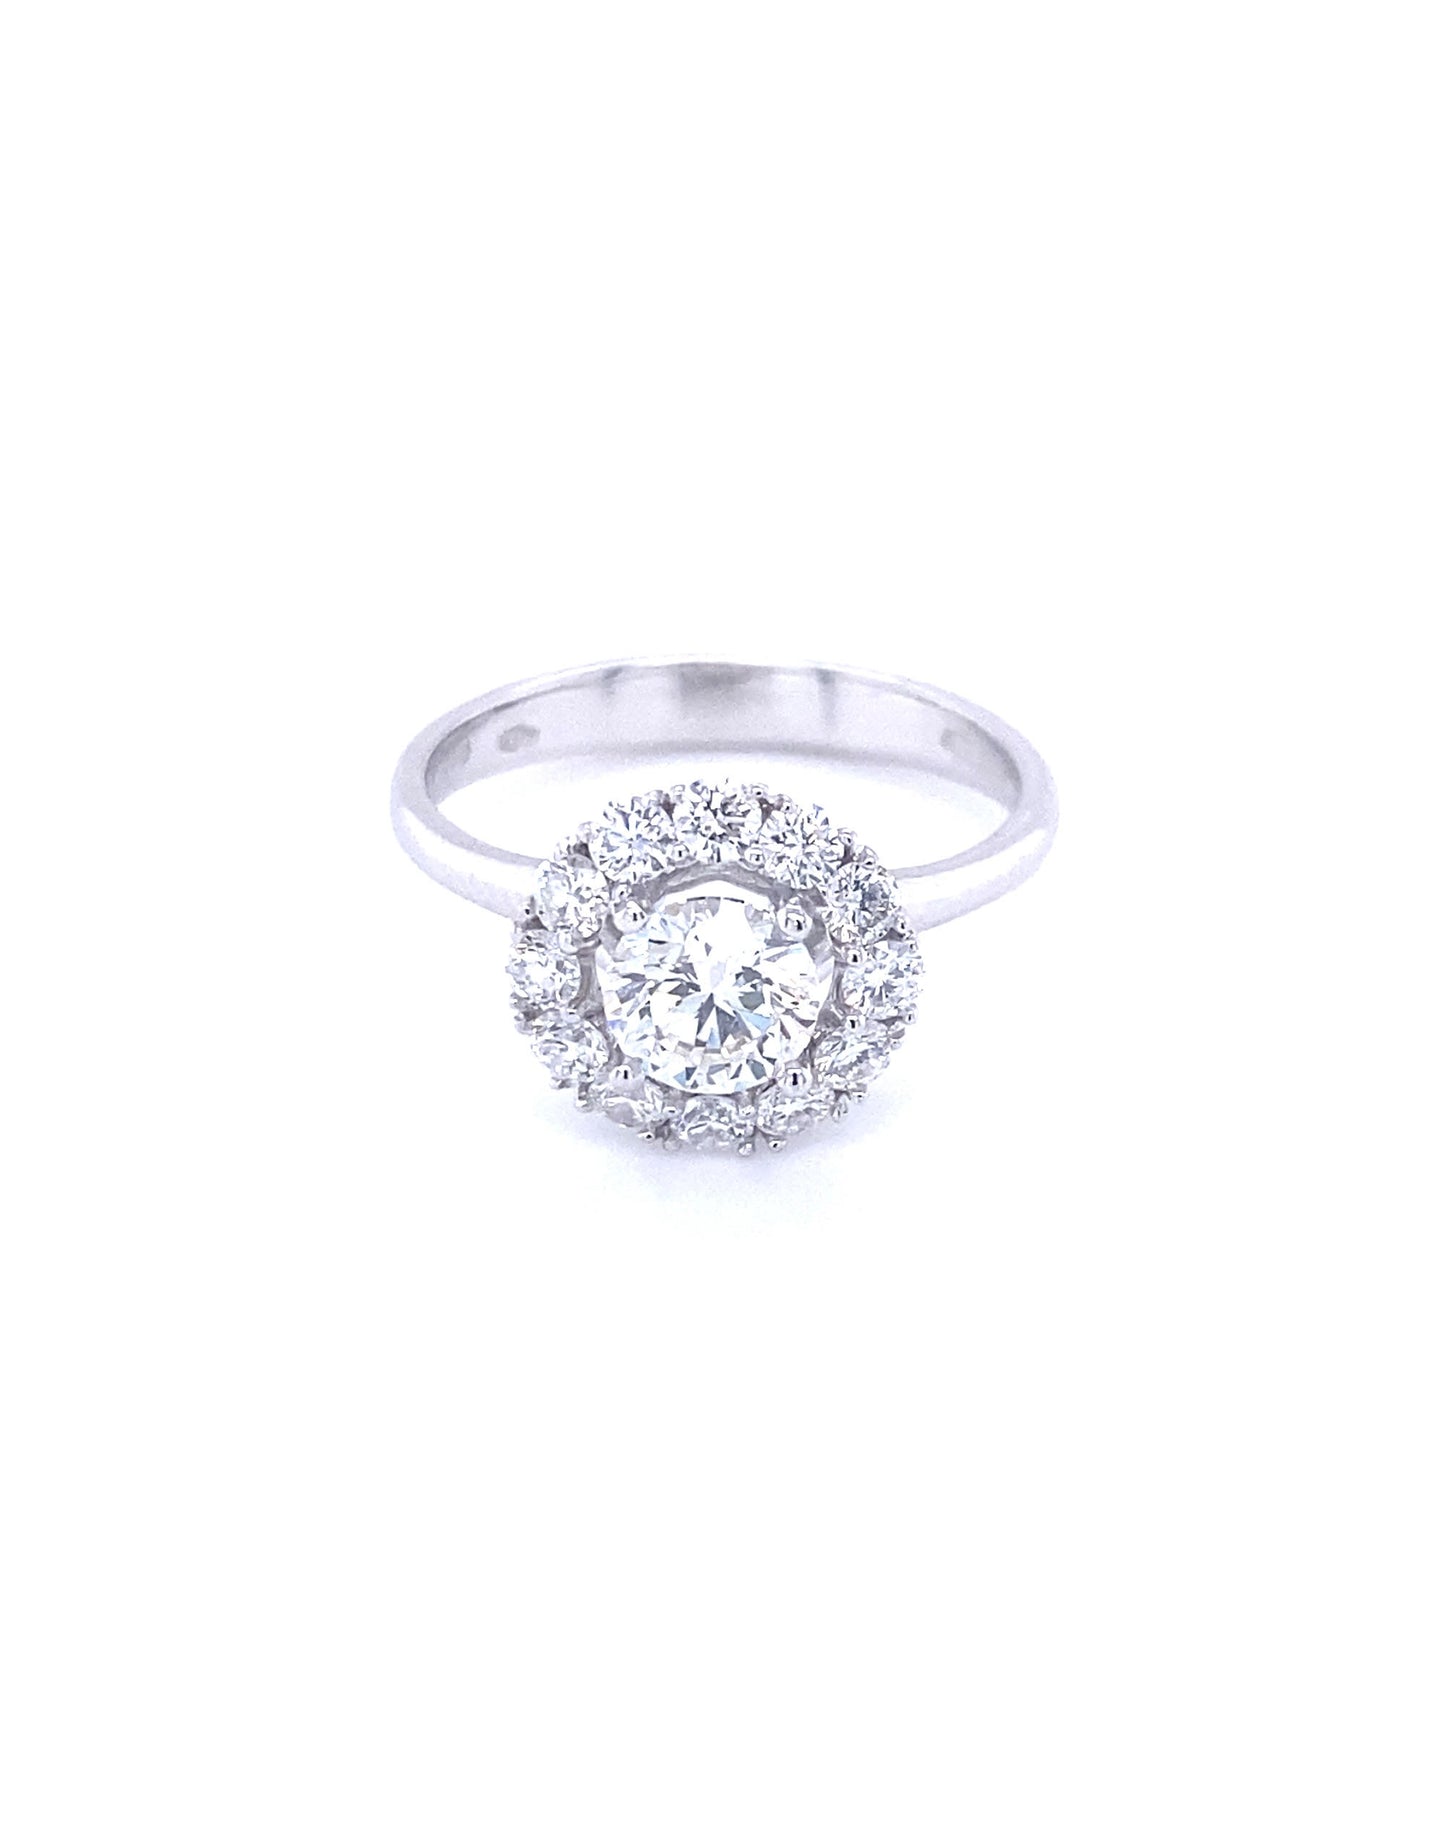 Diamonds Solitaire Effect Engagement Diamond Ring 0.78+ 0.61 Rings